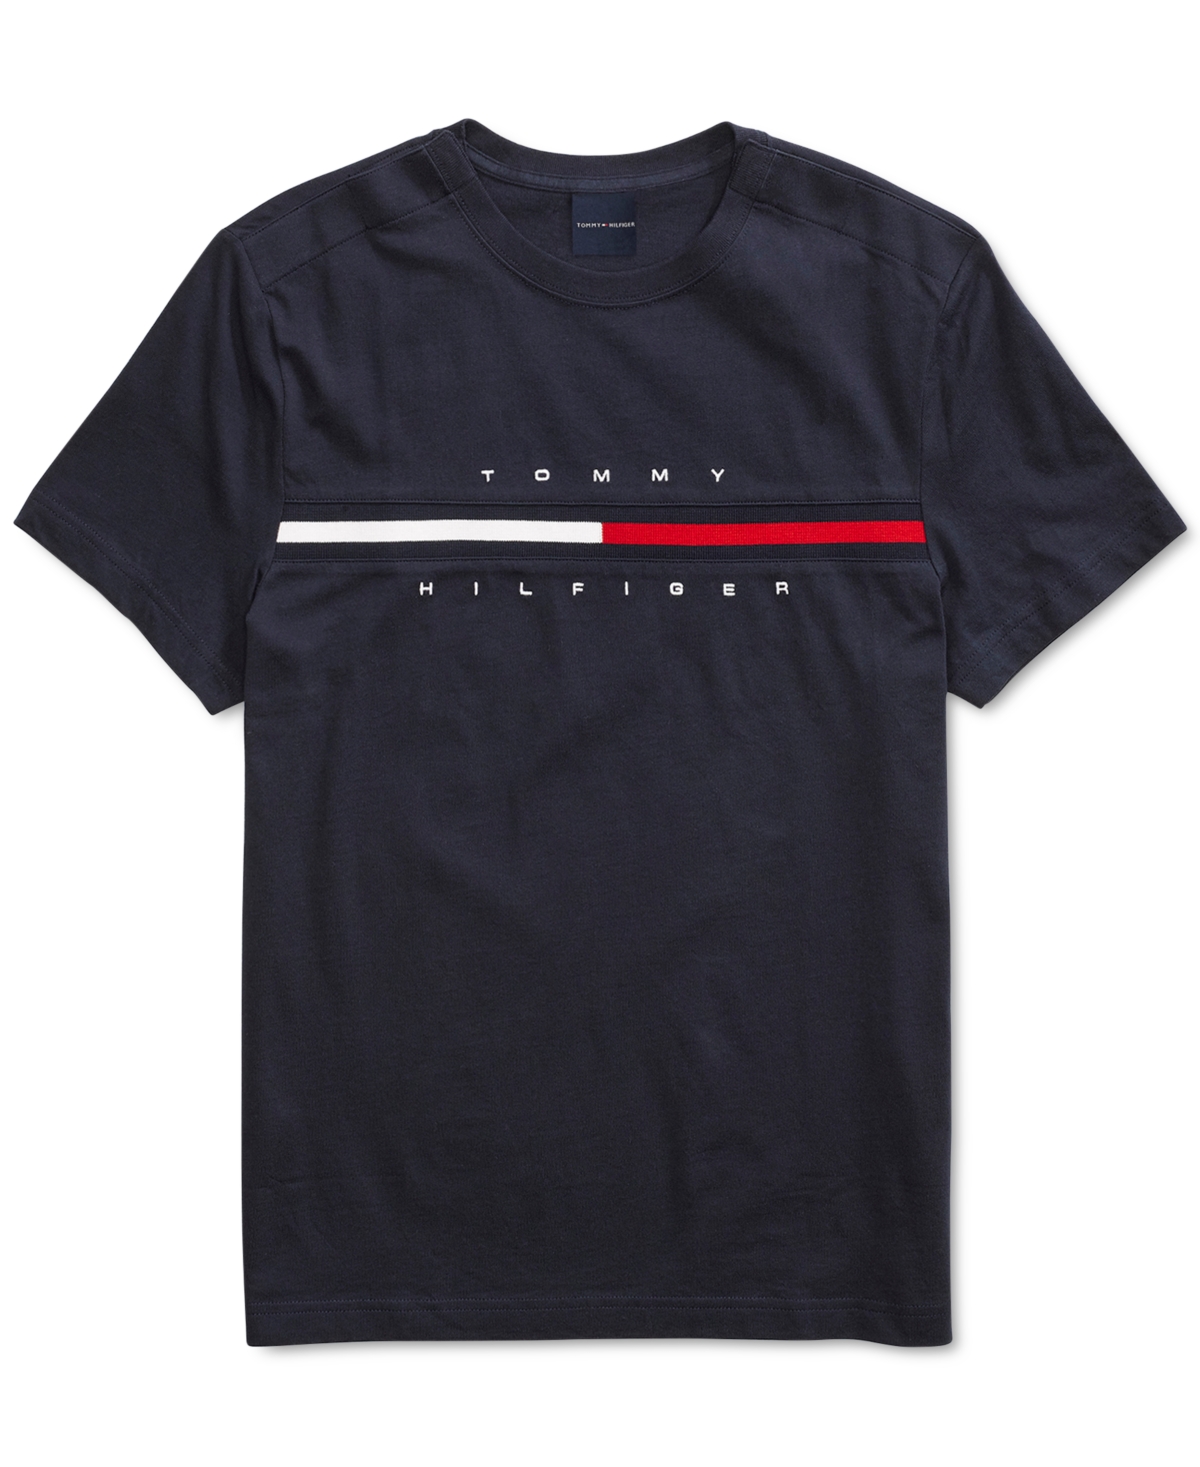 Tommy Hilfiger Adaptive Men's Tino T-Shirt with Magnetic Closure at Shoulders